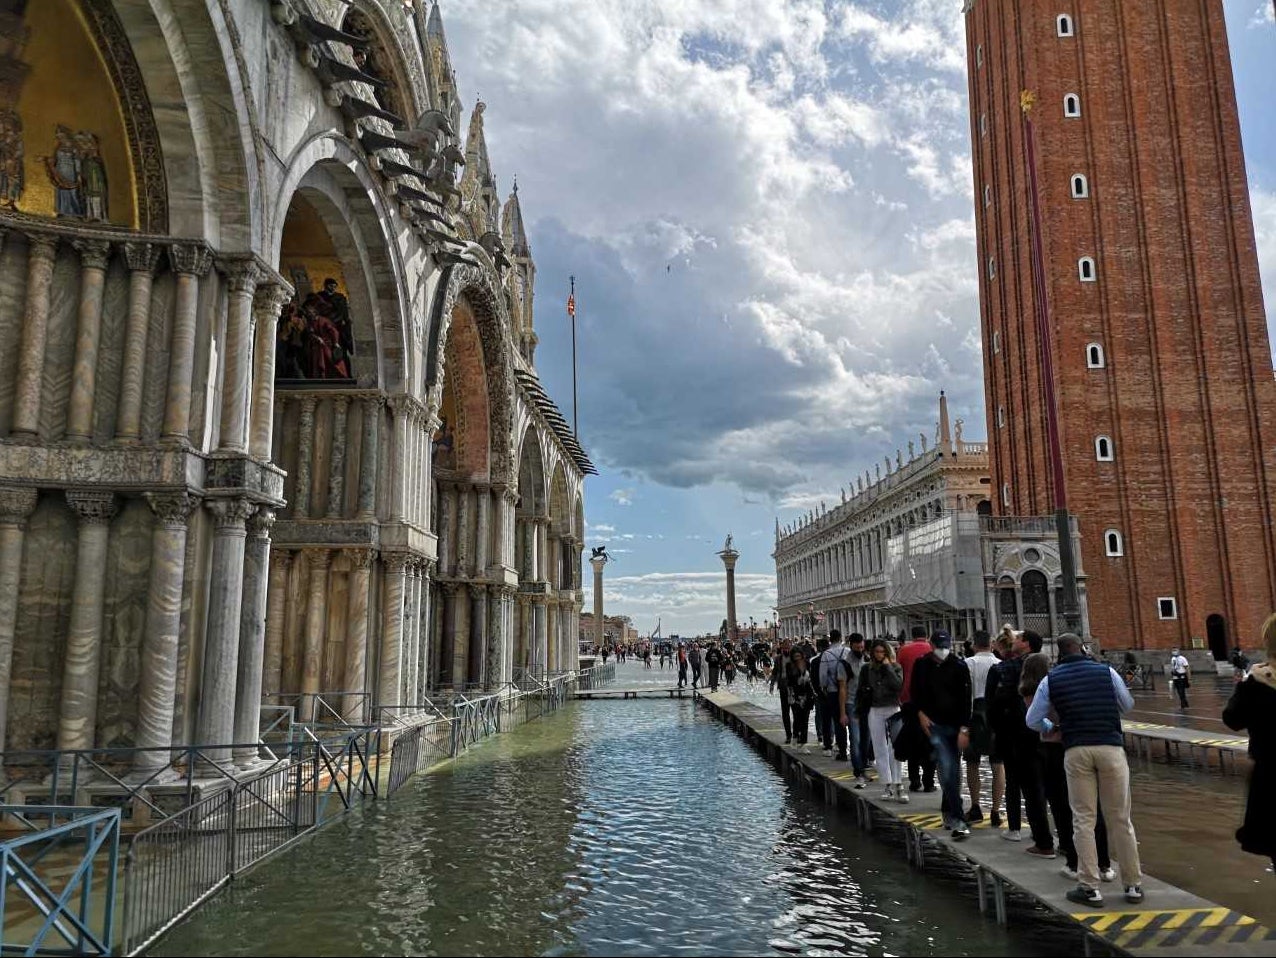 Venice has been at the mercy of flooding for decades